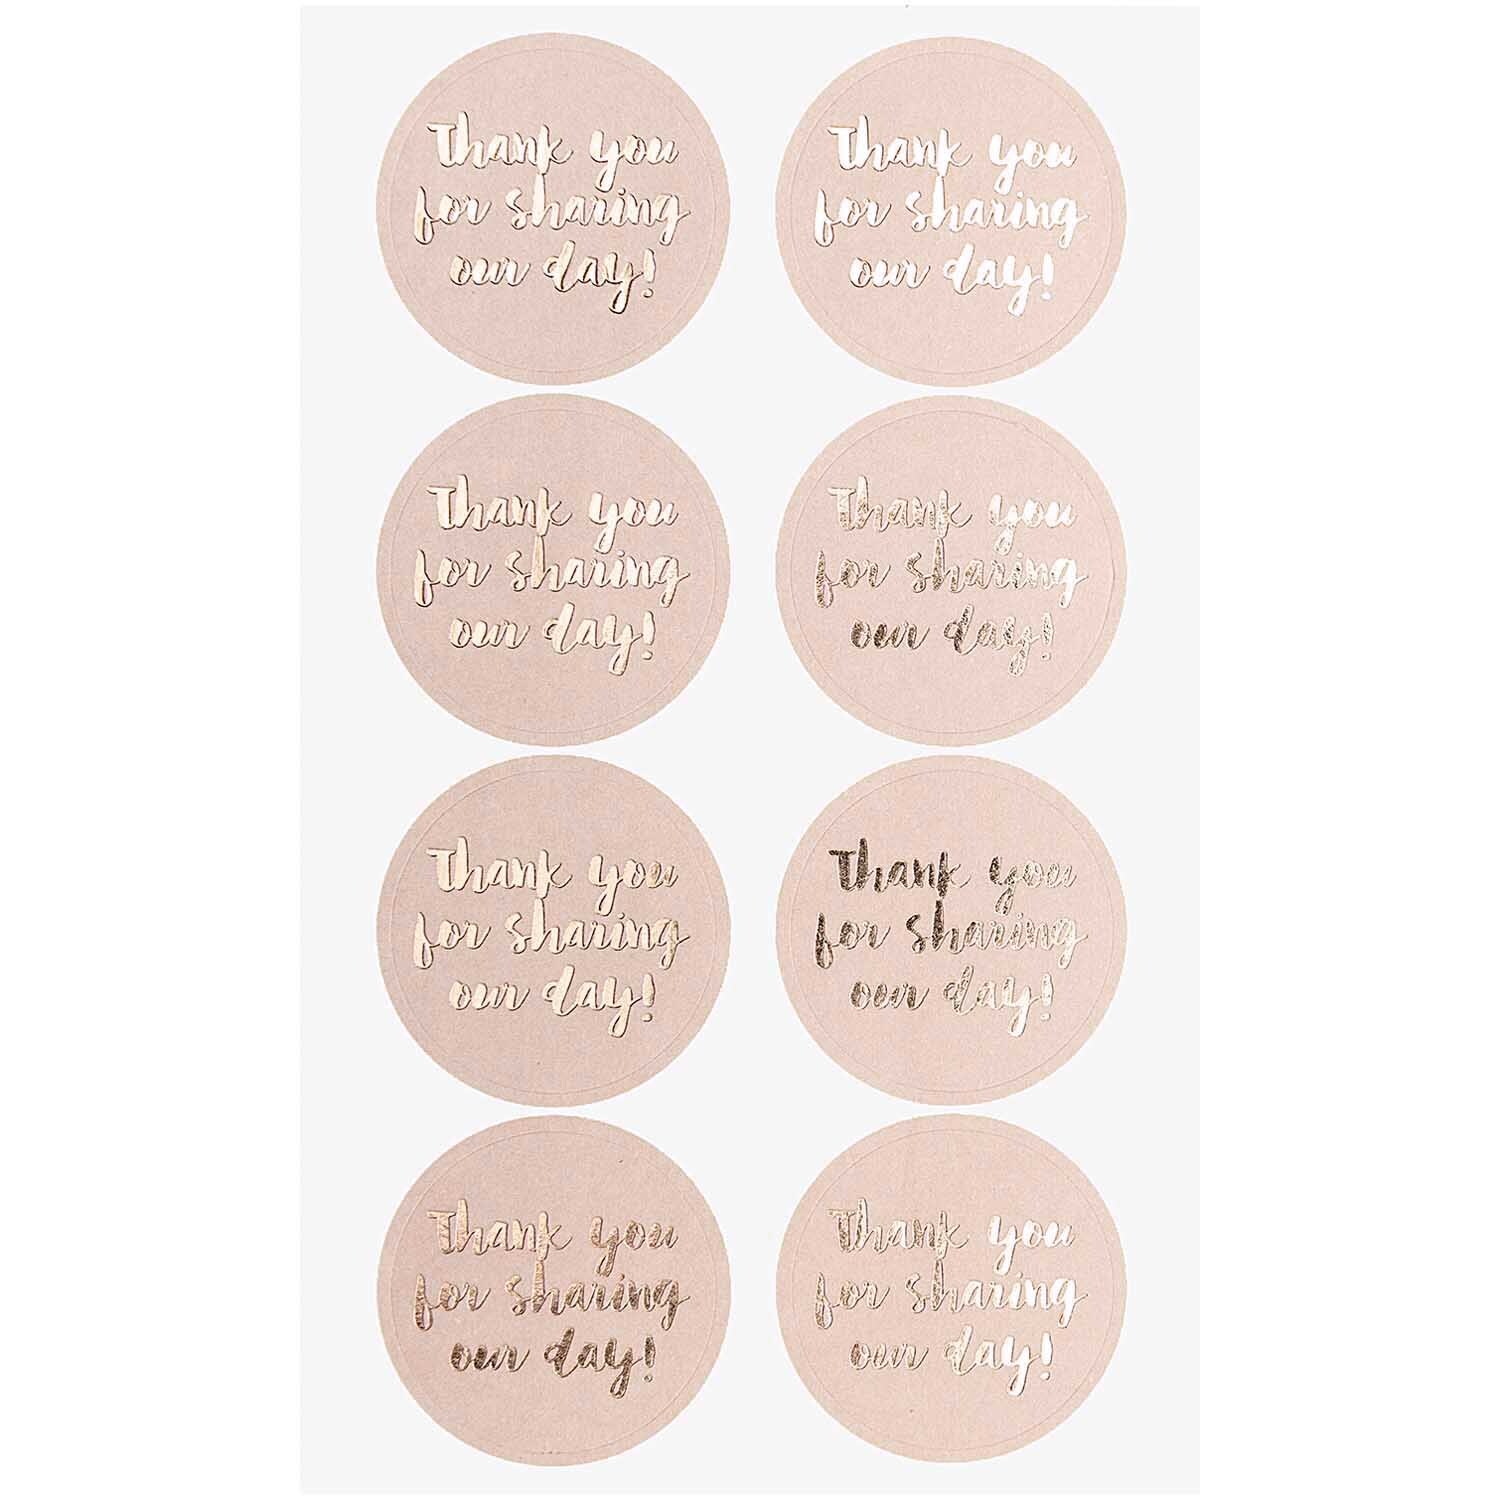 Paper Poetry Sticker Thank you for sharing our day puder 4 Blatt